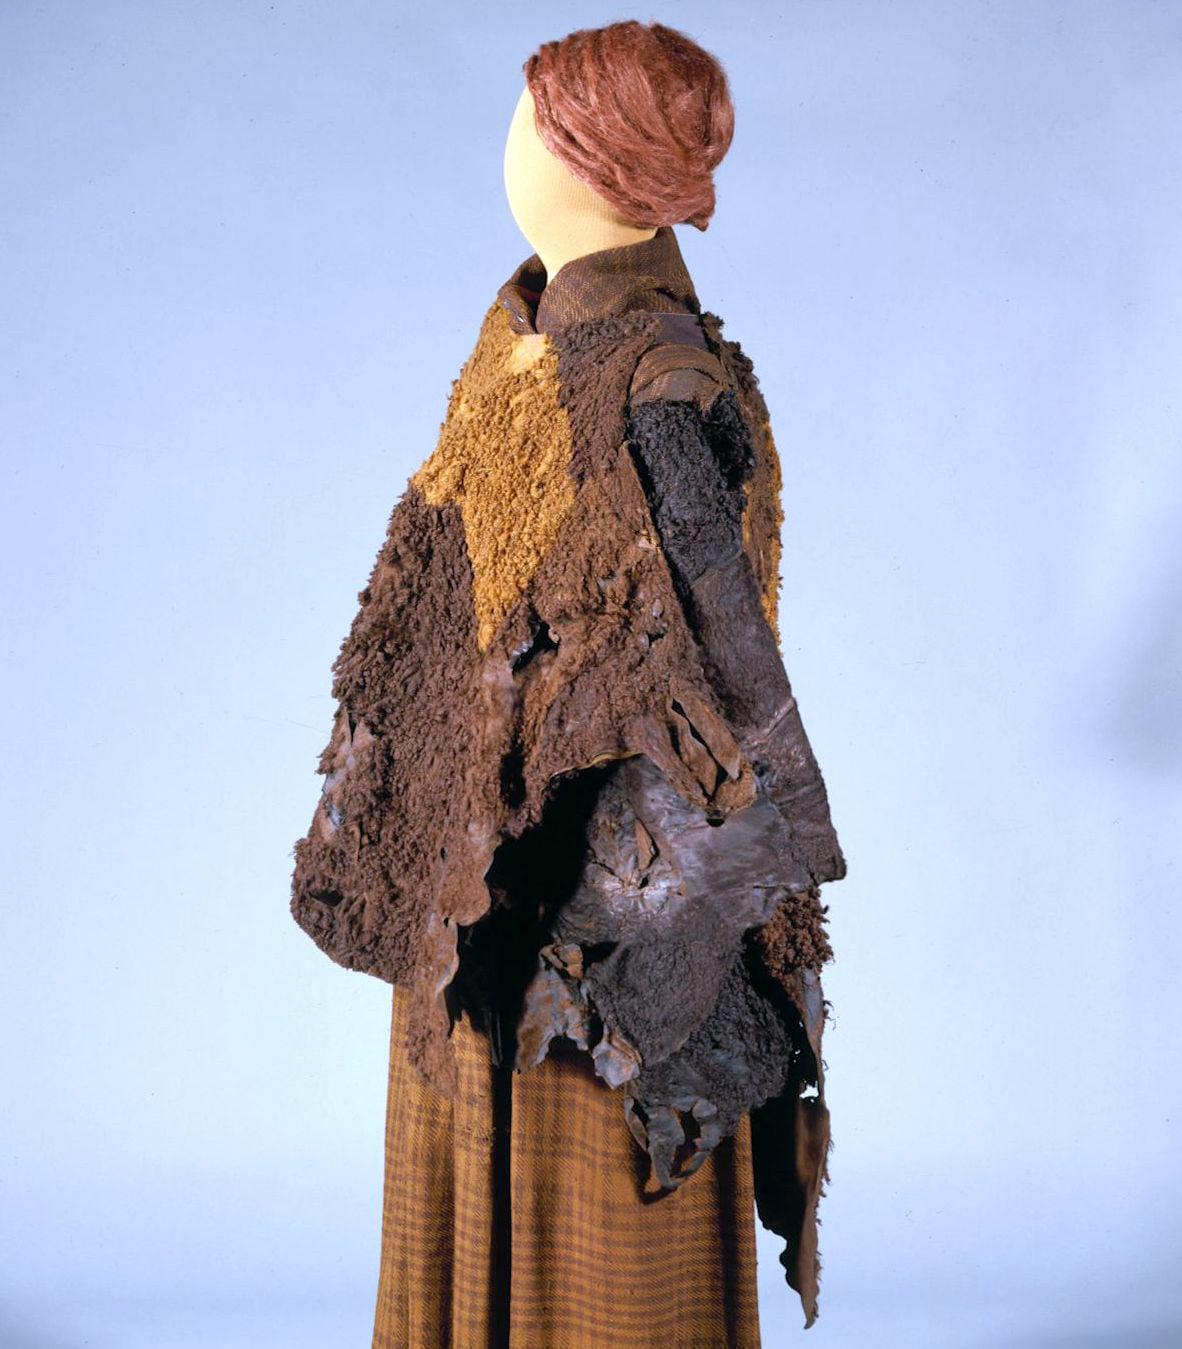 The Ancient Garments of the Huldremose Woman